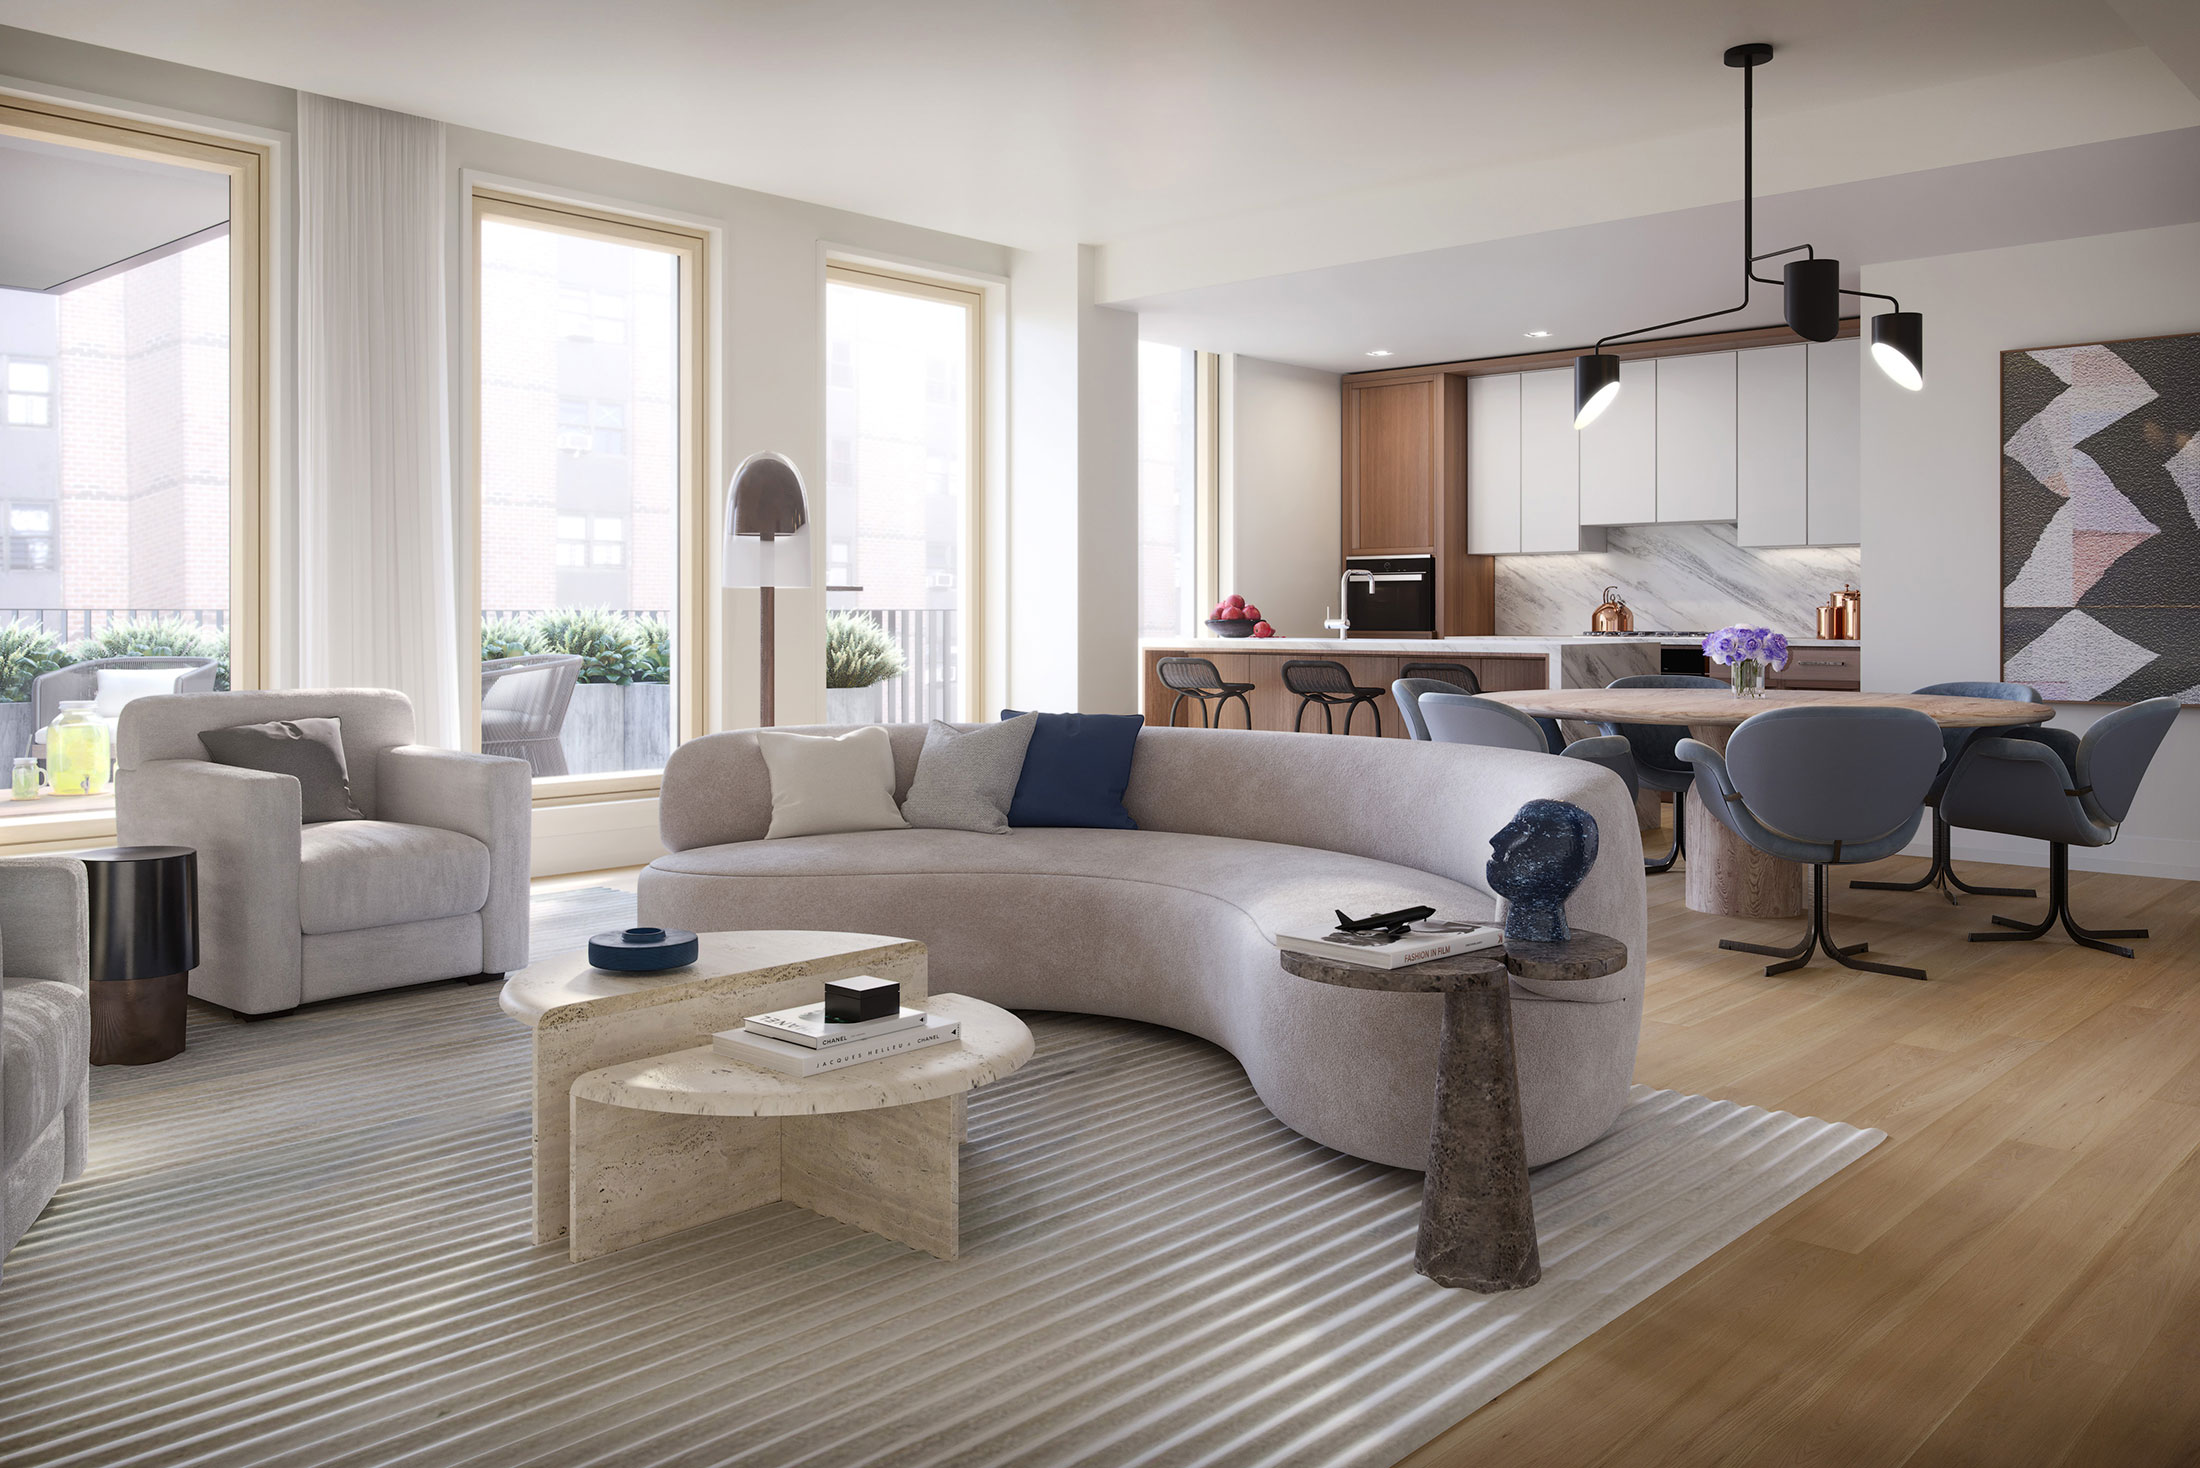 Architectural Rendering of the living room of the 212W93 project located on the Upper West Side, New York City